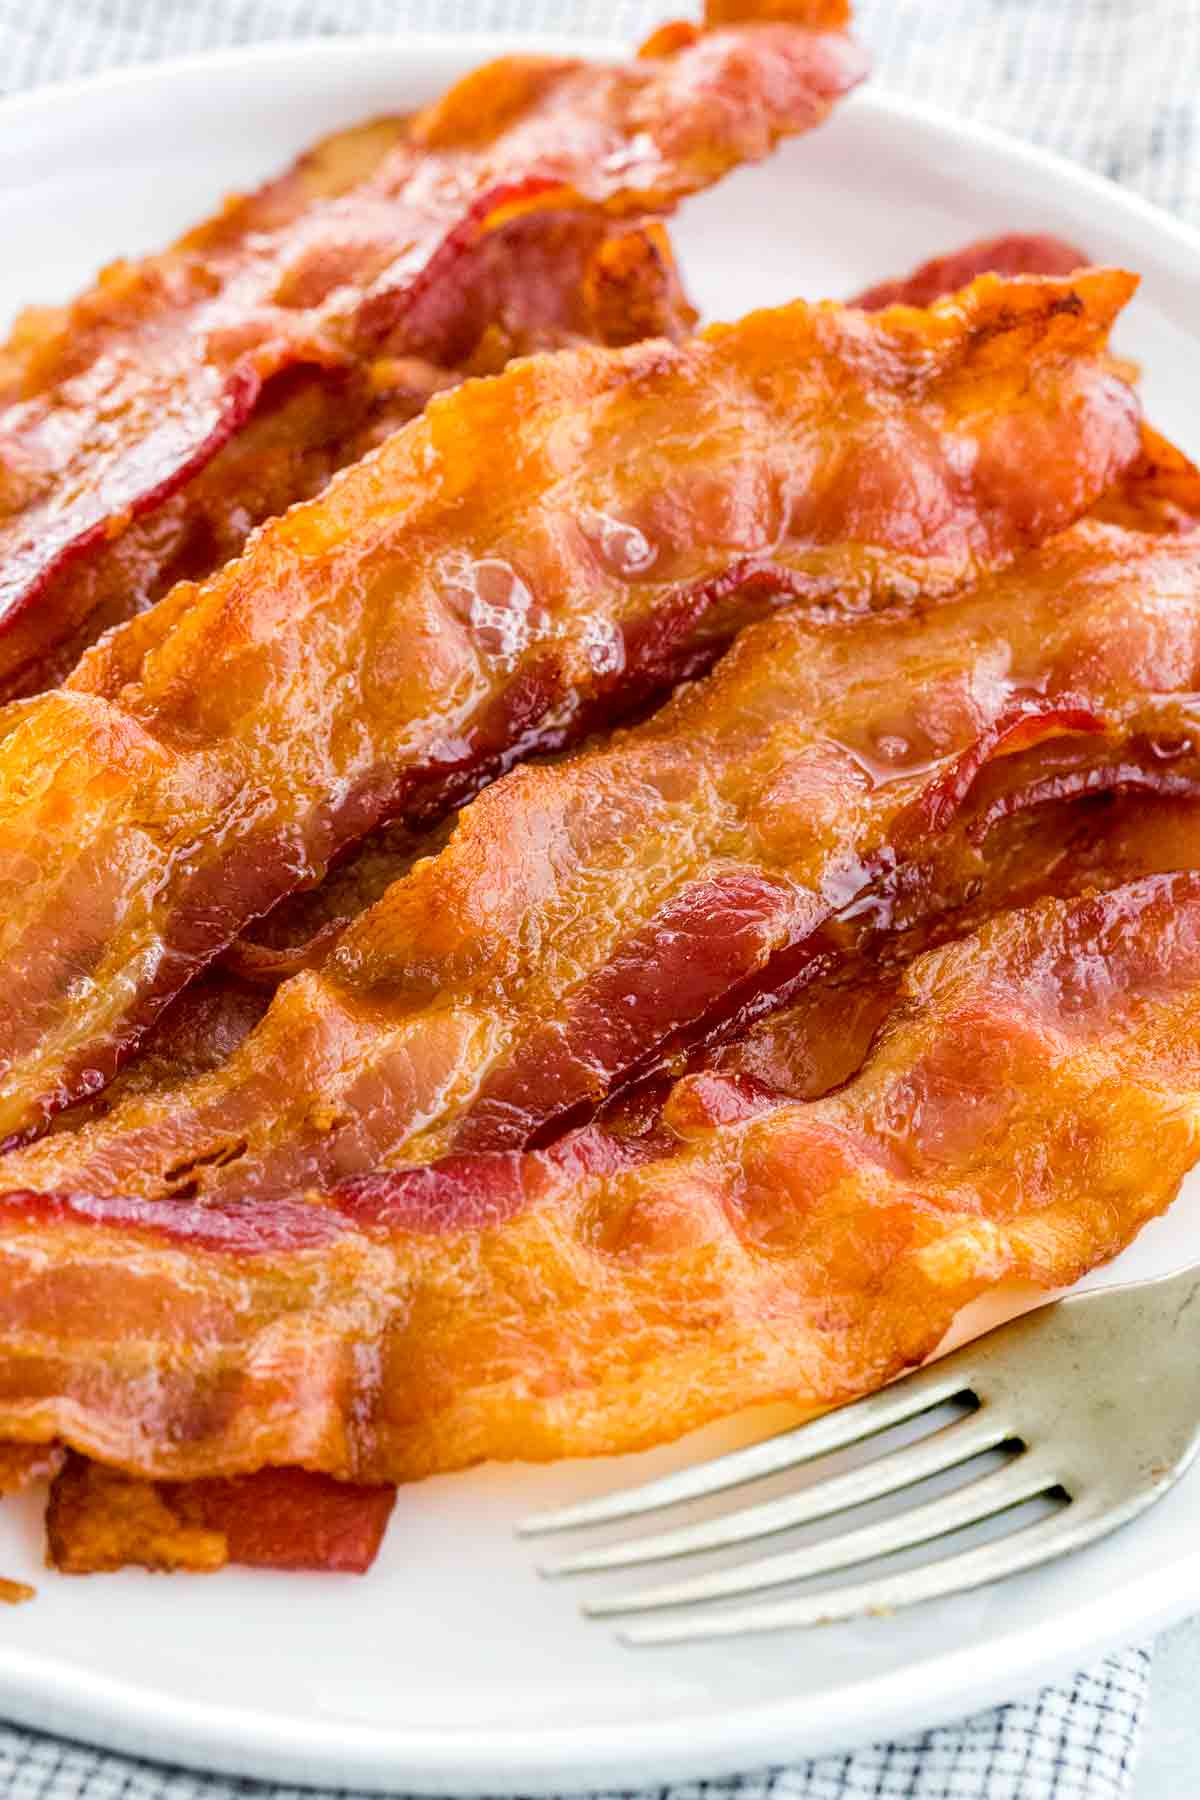 Sizzling And Smoky: How To Cook Bacon In The Oven For A Mouthwatering Meal